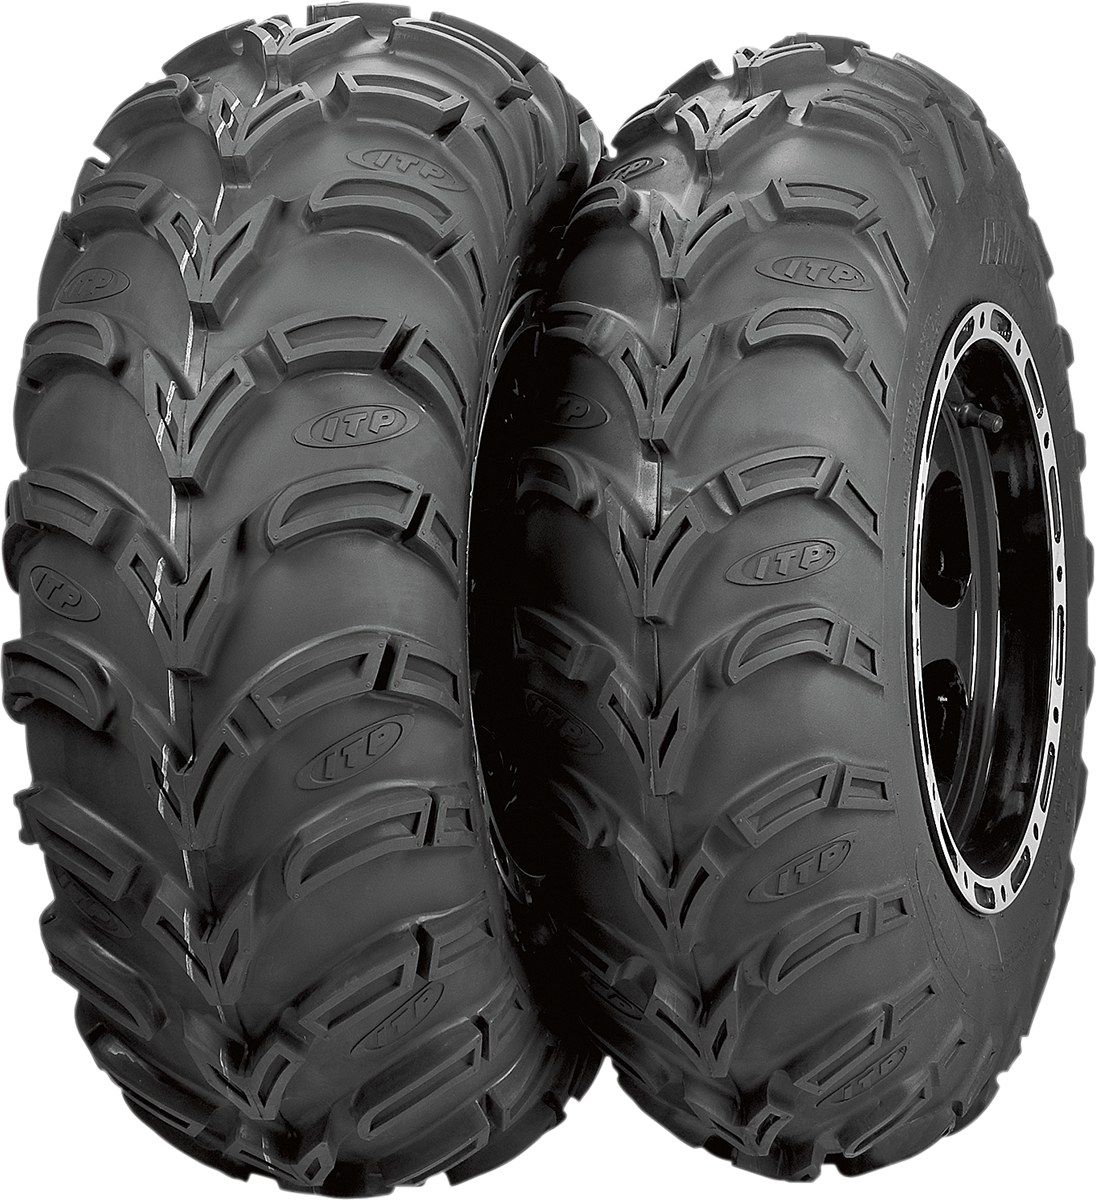 ITP Tire - Mud Lite AT - Front/Rear - 25x8-12 - 6 Ply 56A306